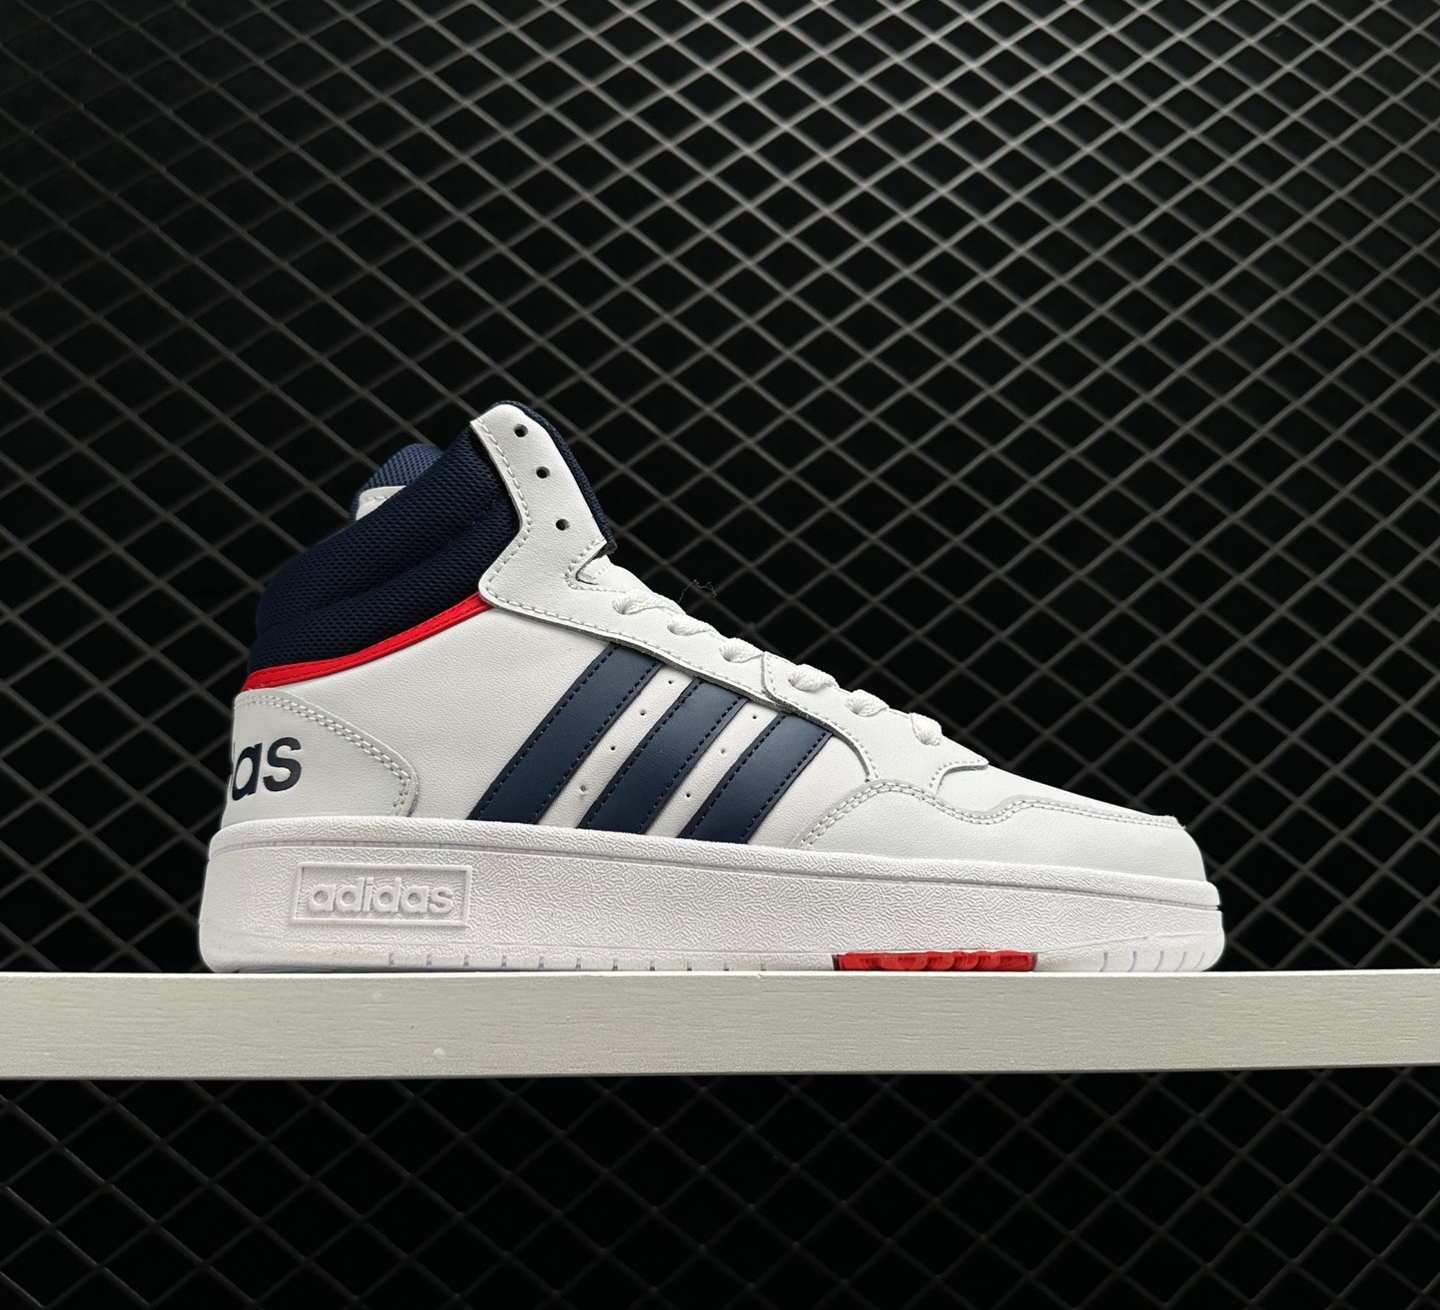 Adidas Hoops 3.0 White Navy Red GY5543 - Premium Basketball Shoes